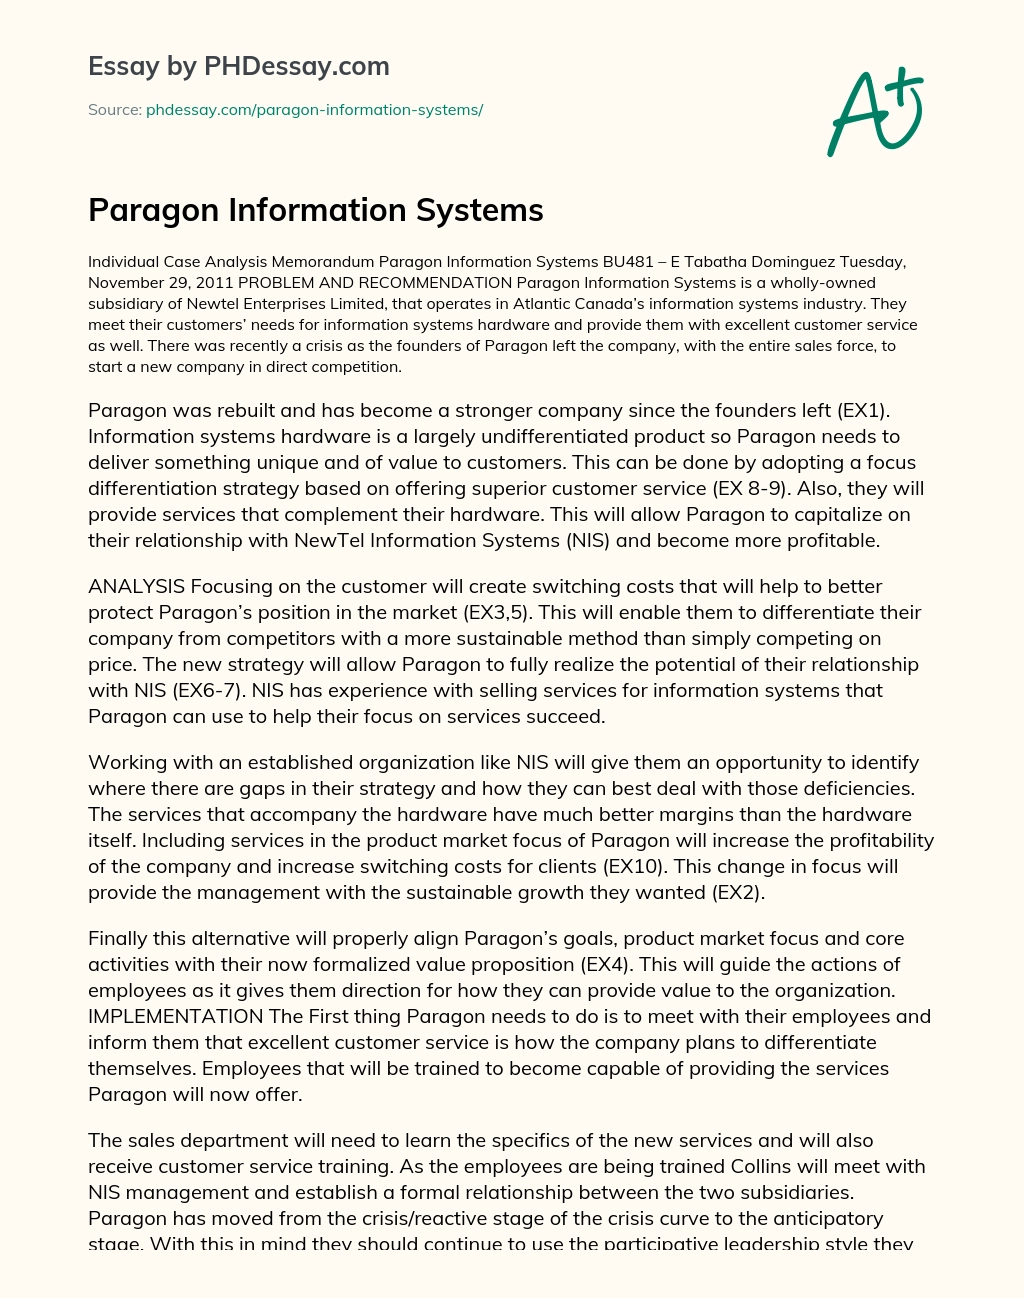 Paragon Information Systems essay